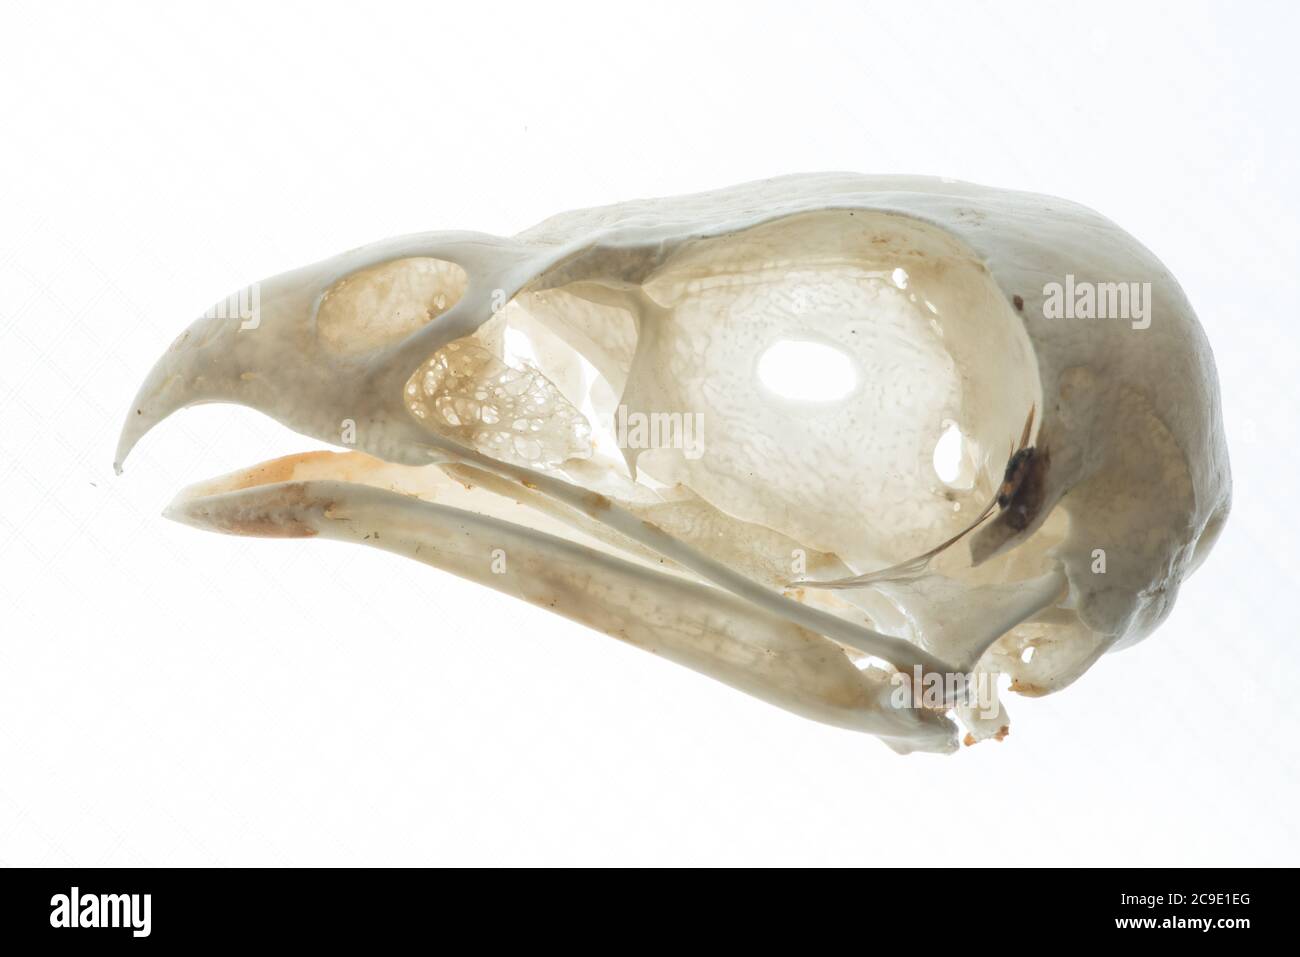 The skull of a red tailed hawk (Buteo jamaicensis) a common bird of prey in North America. Stock Photo